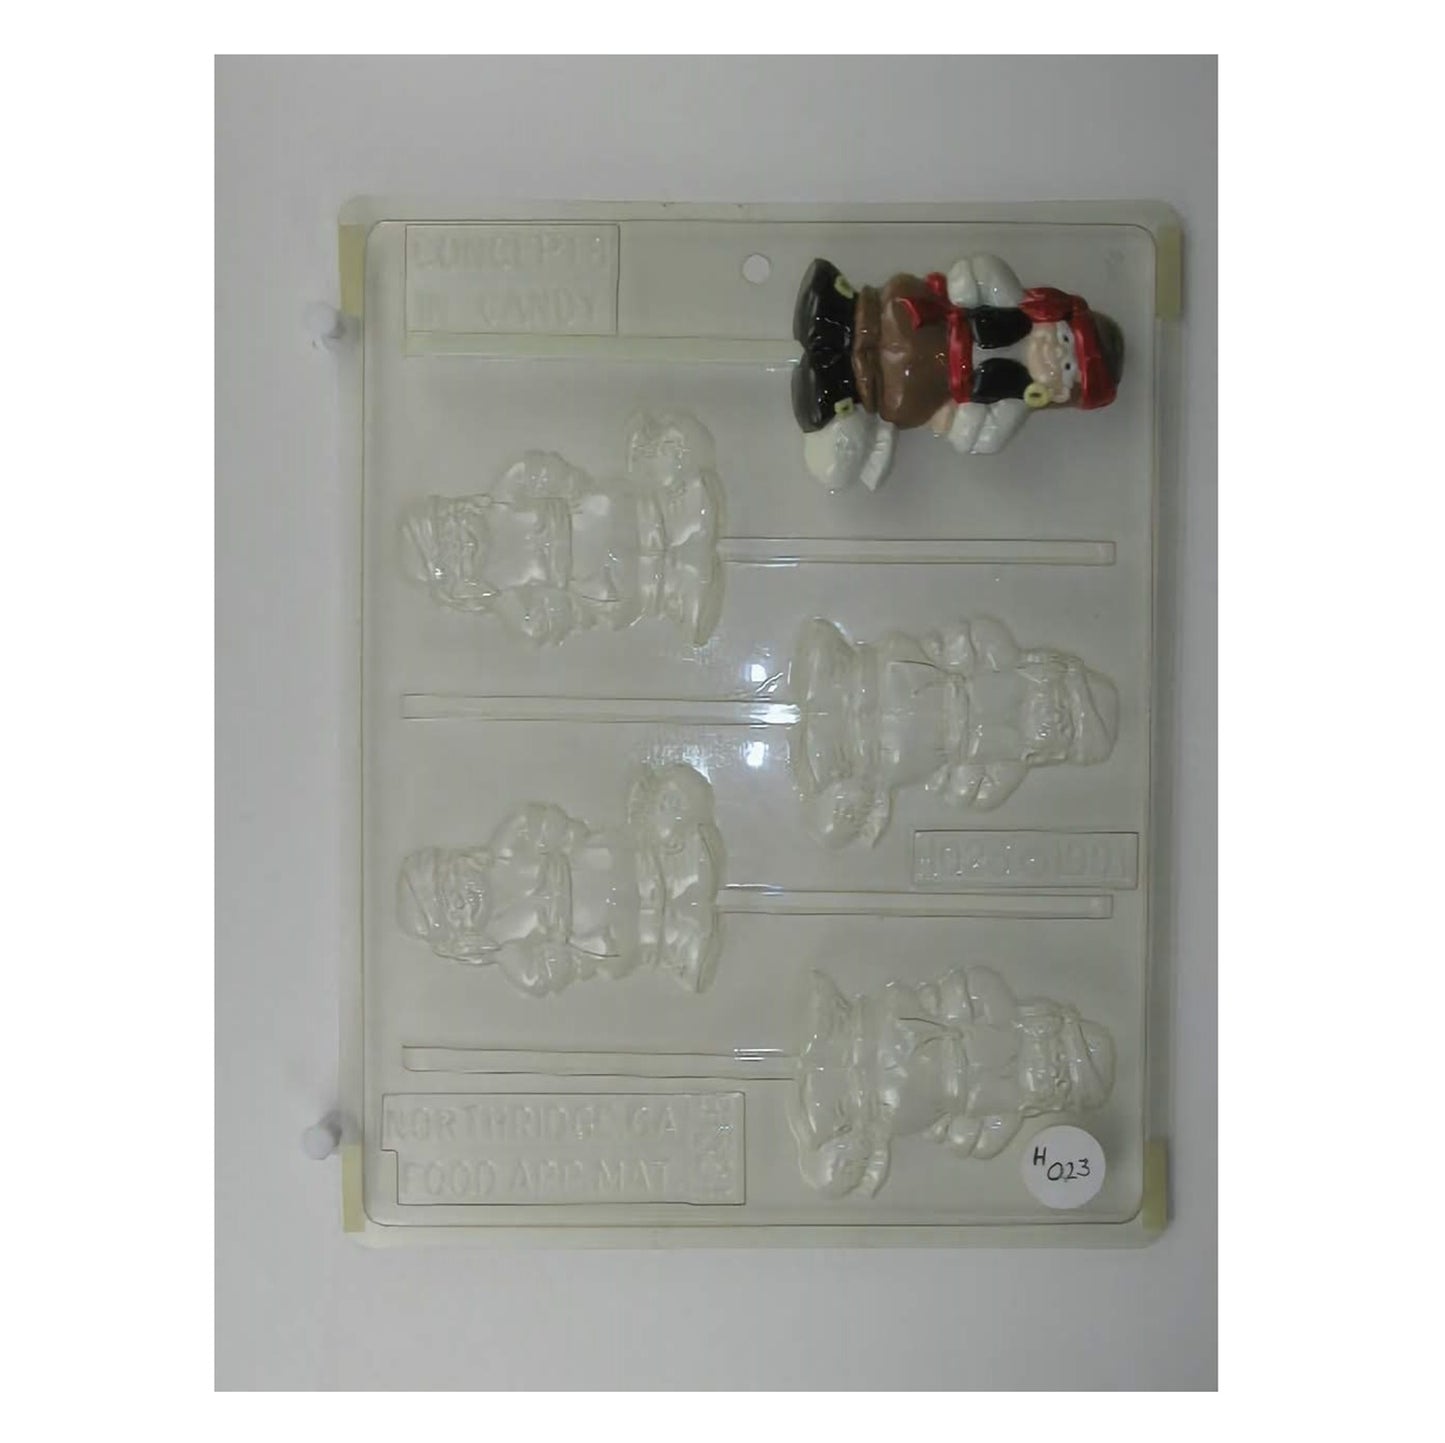 A playful and detailed pirate face chocolate mold, complete with a pirate hat, and a mischievous grin, perfect for themed birthday parties or as a treat for adventurous spirits.